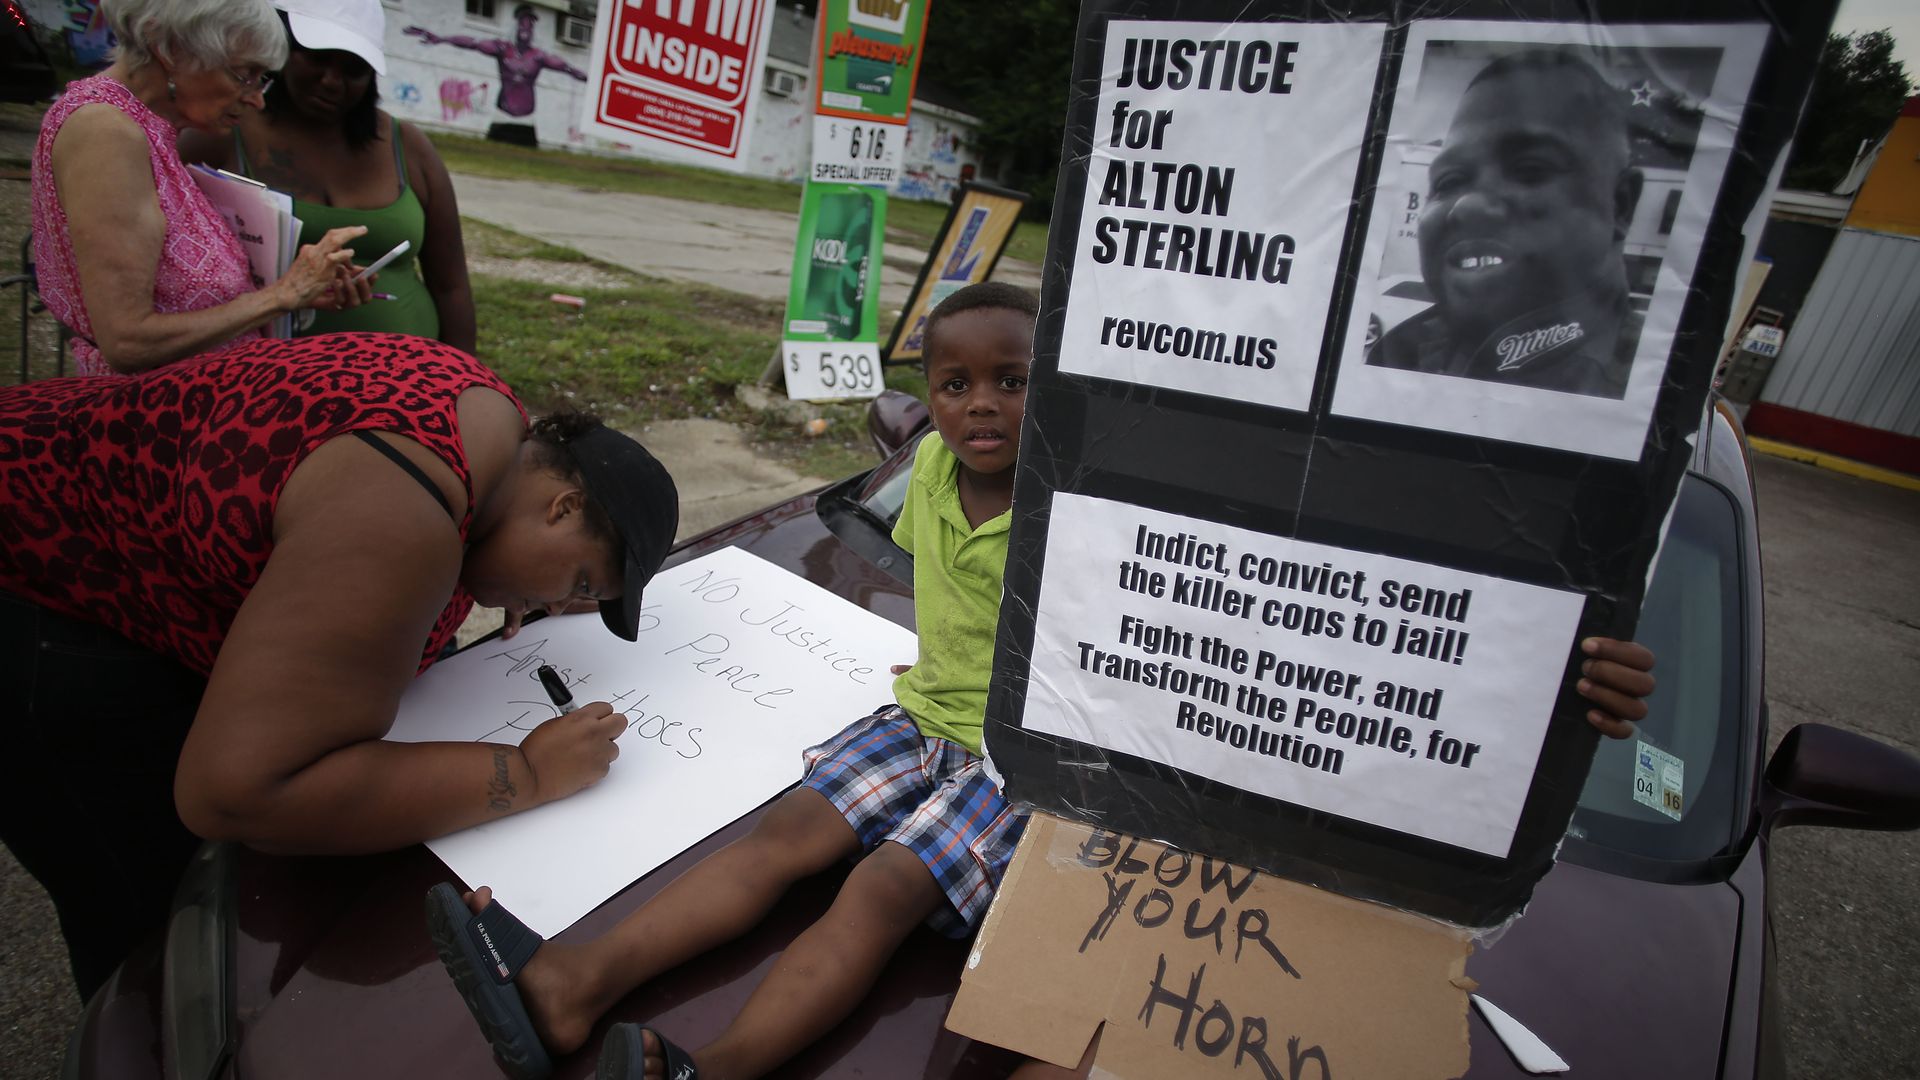 Demonstrators protest the fatal police shooting of Alton Sterling July 21, 2016.